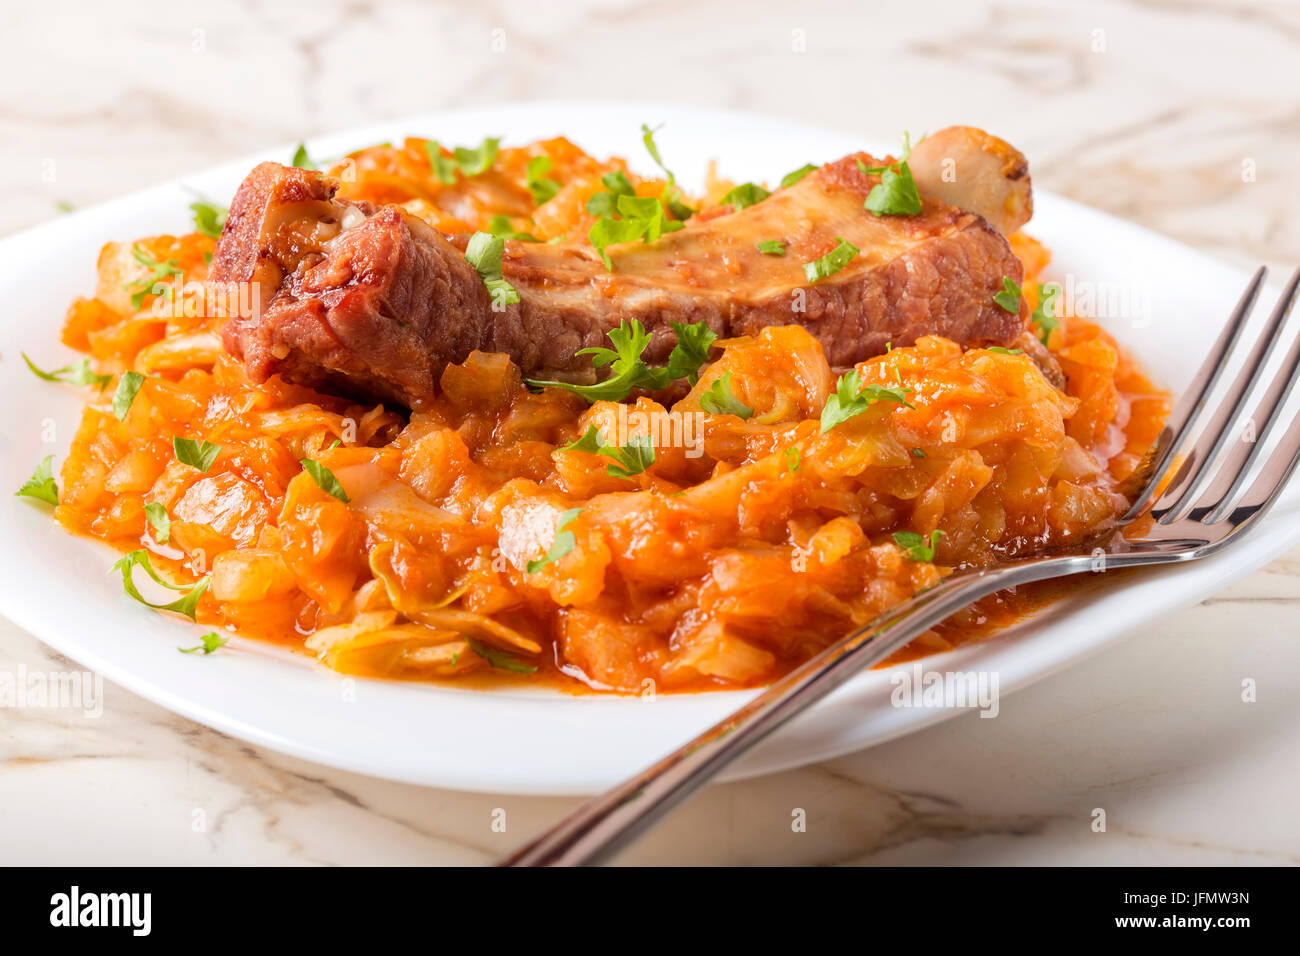 Cabbage cooked with Smoked Pork Ribs and green parsley Served in white plate with fork Stock Photo